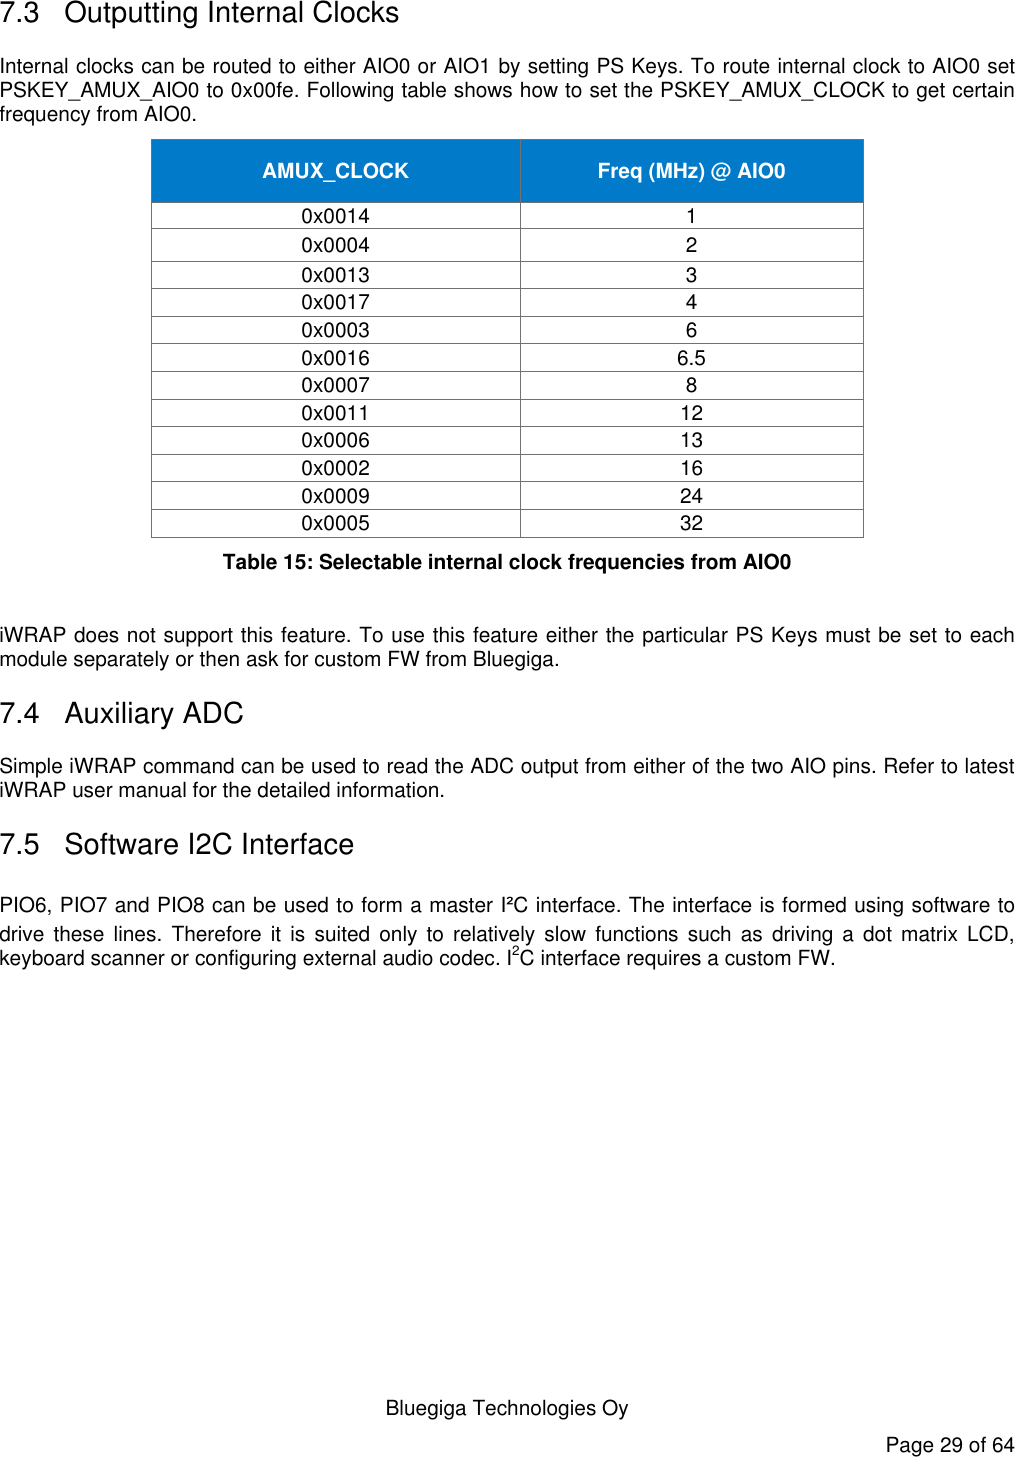   Bluegiga Technologies Oy Page 29 of 64 7.3  Outputting Internal Clocks Internal clocks can be routed to either AIO0 or AIO1 by setting PS Keys. To route internal clock to AIO0 set PSKEY_AMUX_AIO0 to 0x00fe. Following table shows how to set the PSKEY_AMUX_CLOCK to get certain frequency from AIO0. AMUX_CLOCK Freq (MHz) @ AIO0 0x0014 1 0x0004 2 0x0013 3 0x0017 4 0x0003 6 0x0016 6.5 0x0007 8 0x0011 12 0x0006 13 0x0002 16 0x0009 24 0x0005 32 Table 15: Selectable internal clock frequencies from AIO0  iWRAP does not support this feature. To use this feature either the particular PS Keys must be set to each module separately or then ask for custom FW from Bluegiga. 7.4  Auxiliary ADC Simple iWRAP command can be used to read the ADC output from either of the two AIO pins. Refer to latest iWRAP user manual for the detailed information. 7.5  Software I2C Interface PIO6, PIO7 and PIO8 can be used to form a master I²C interface. The interface is formed using software to drive  these  lines.  Therefore  it  is  suited only  to  relatively slow  functions such  as driving  a dot  matrix LCD, keyboard scanner or configuring external audio codec. I2C interface requires a custom FW.    